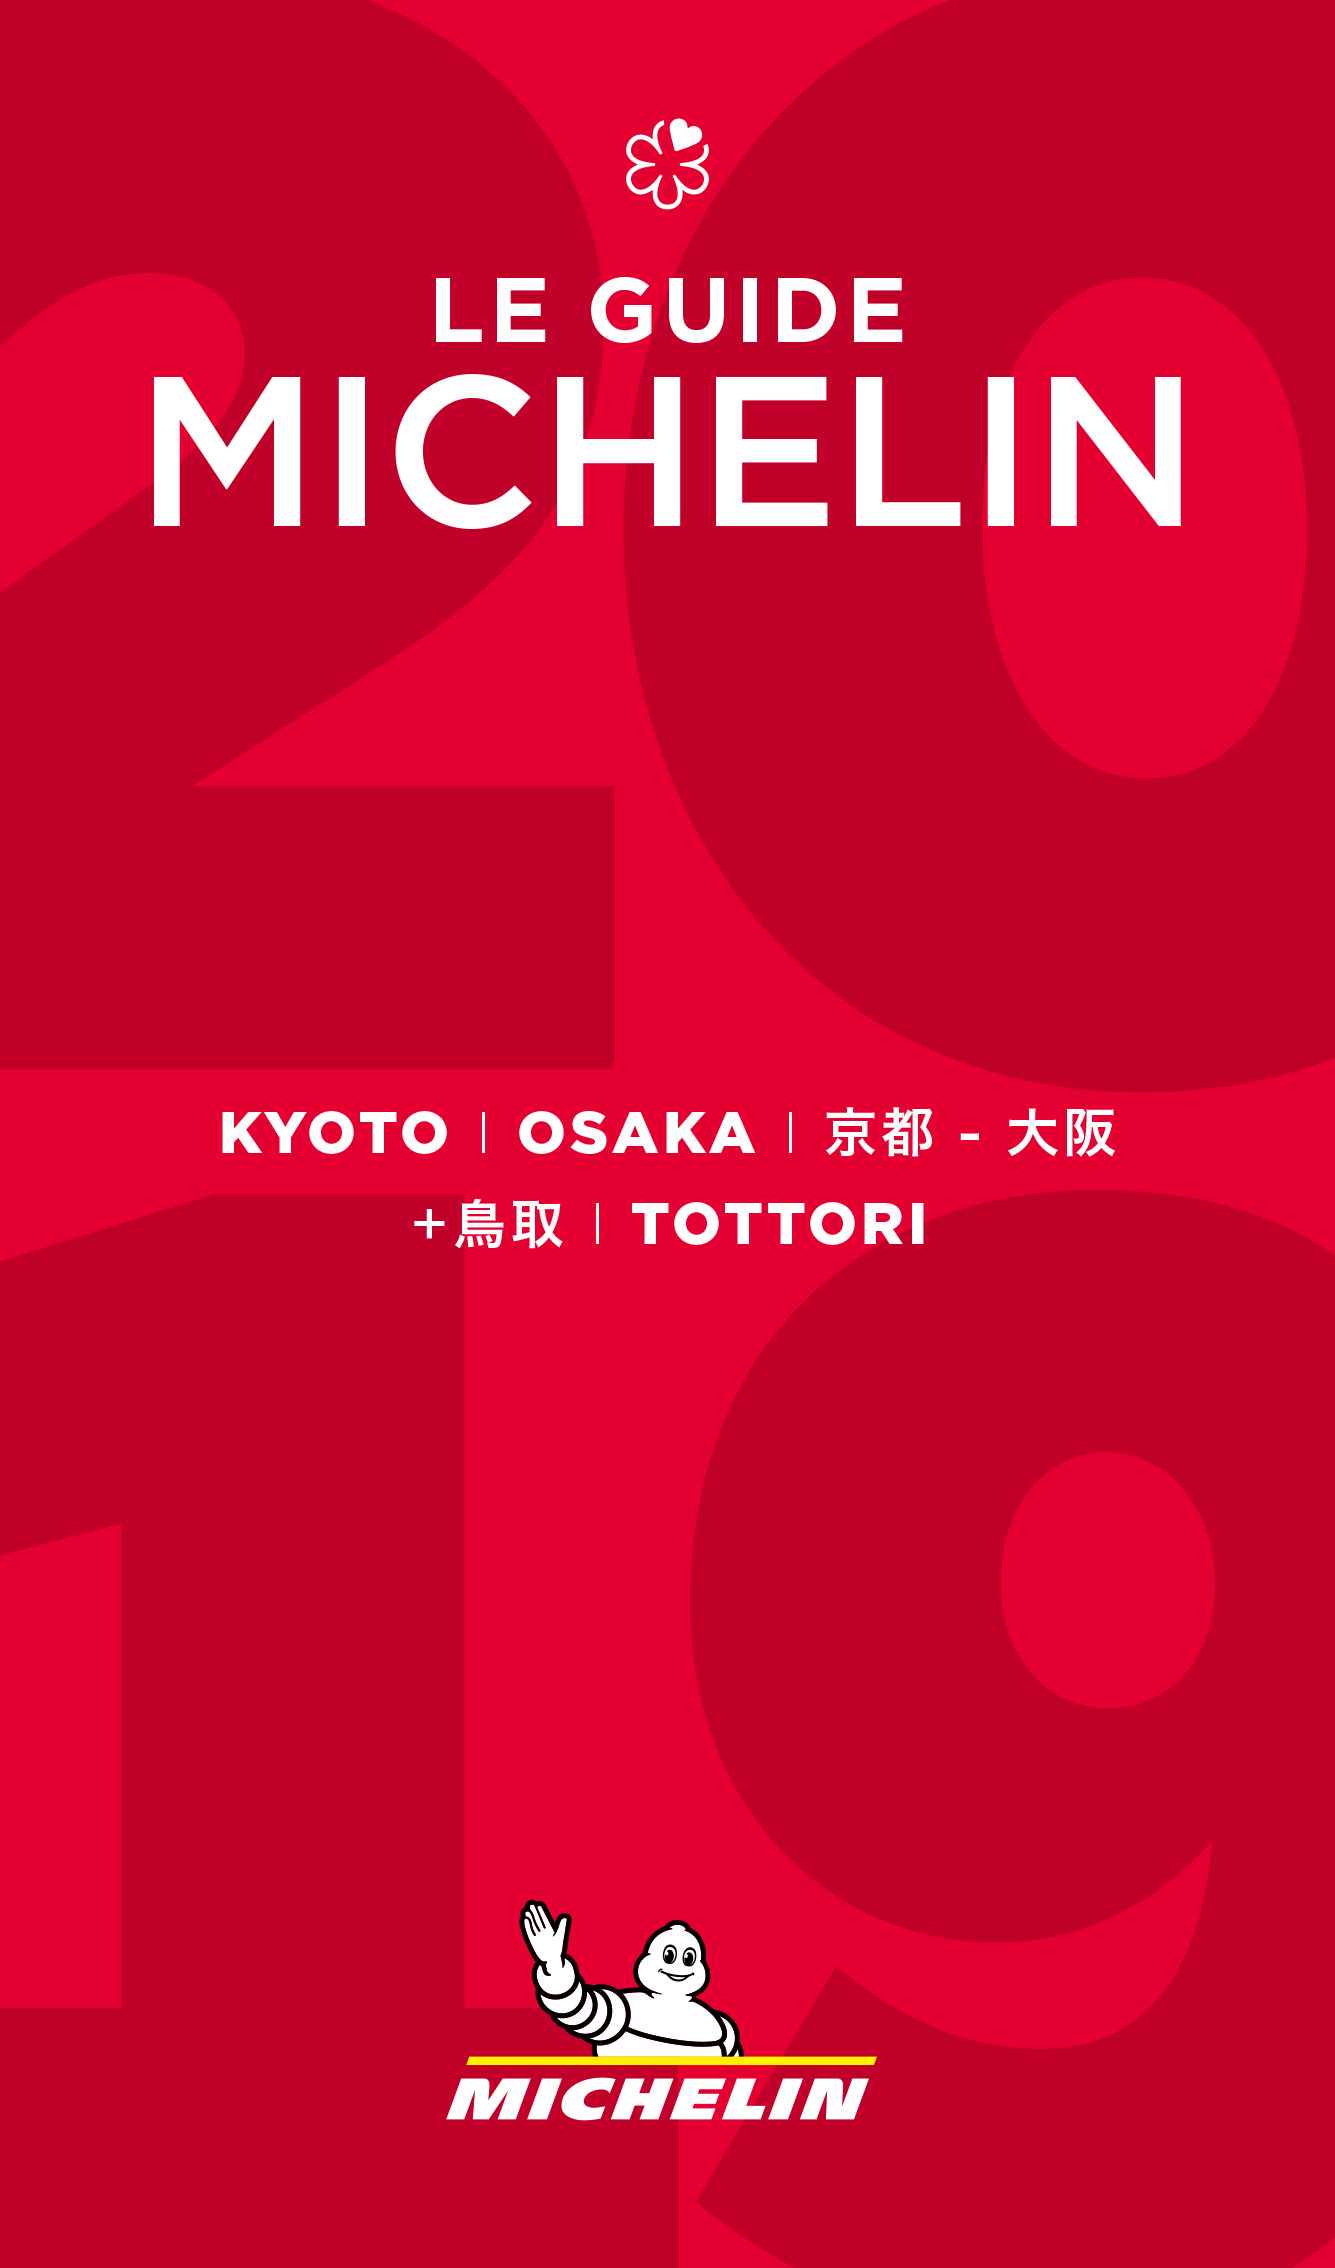 IMG: Featured in the Michelin Guide Kyoto Osaka Tottori 2019